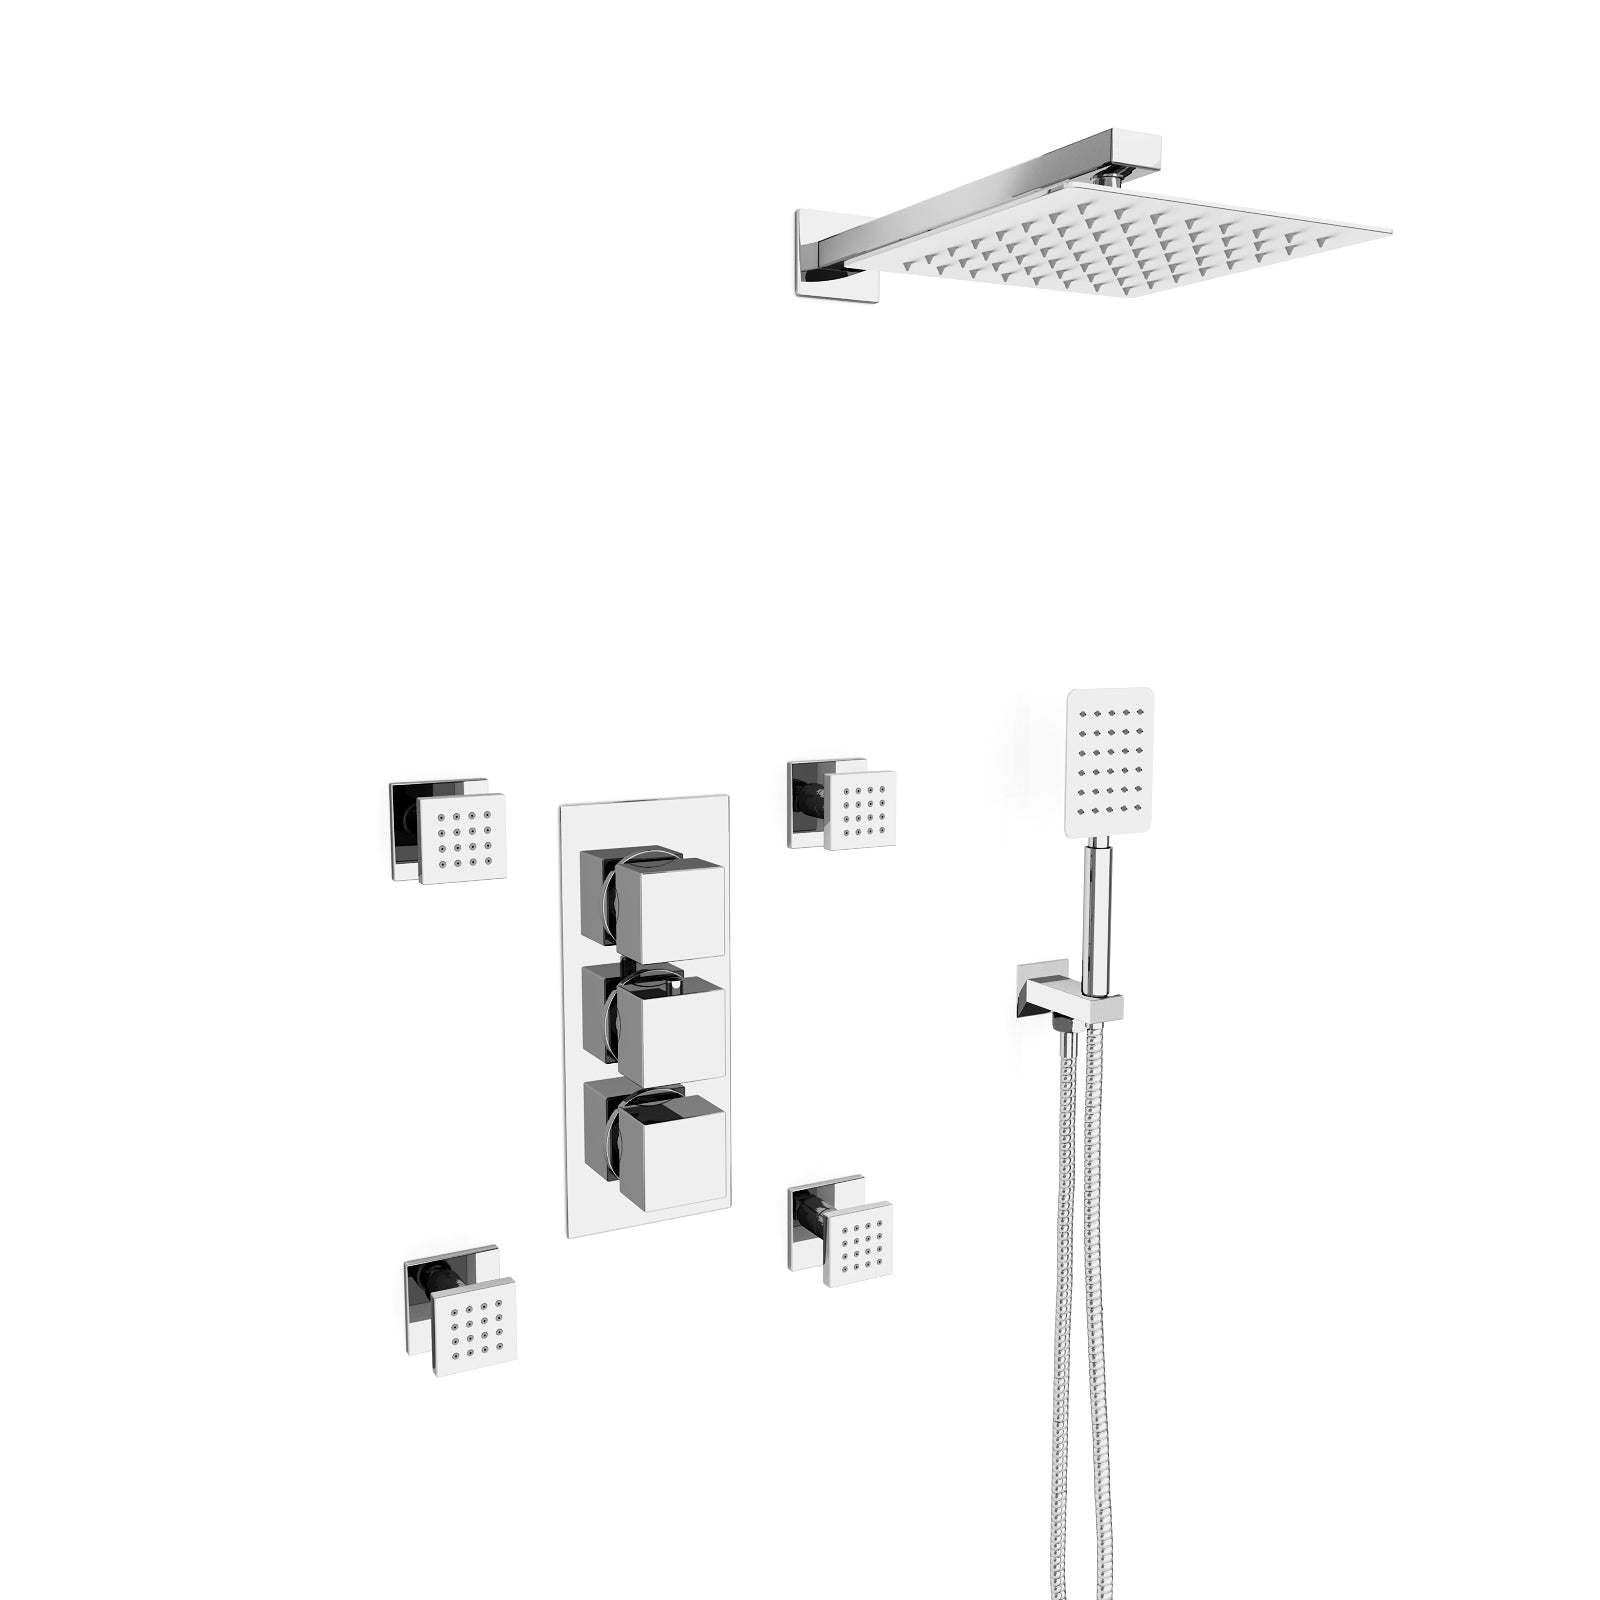 Olive Square 3 Way Concealed Thermostatic Shower Mixer Valve, Shower Head, Handheld, 4x Body Jets Set Chrome